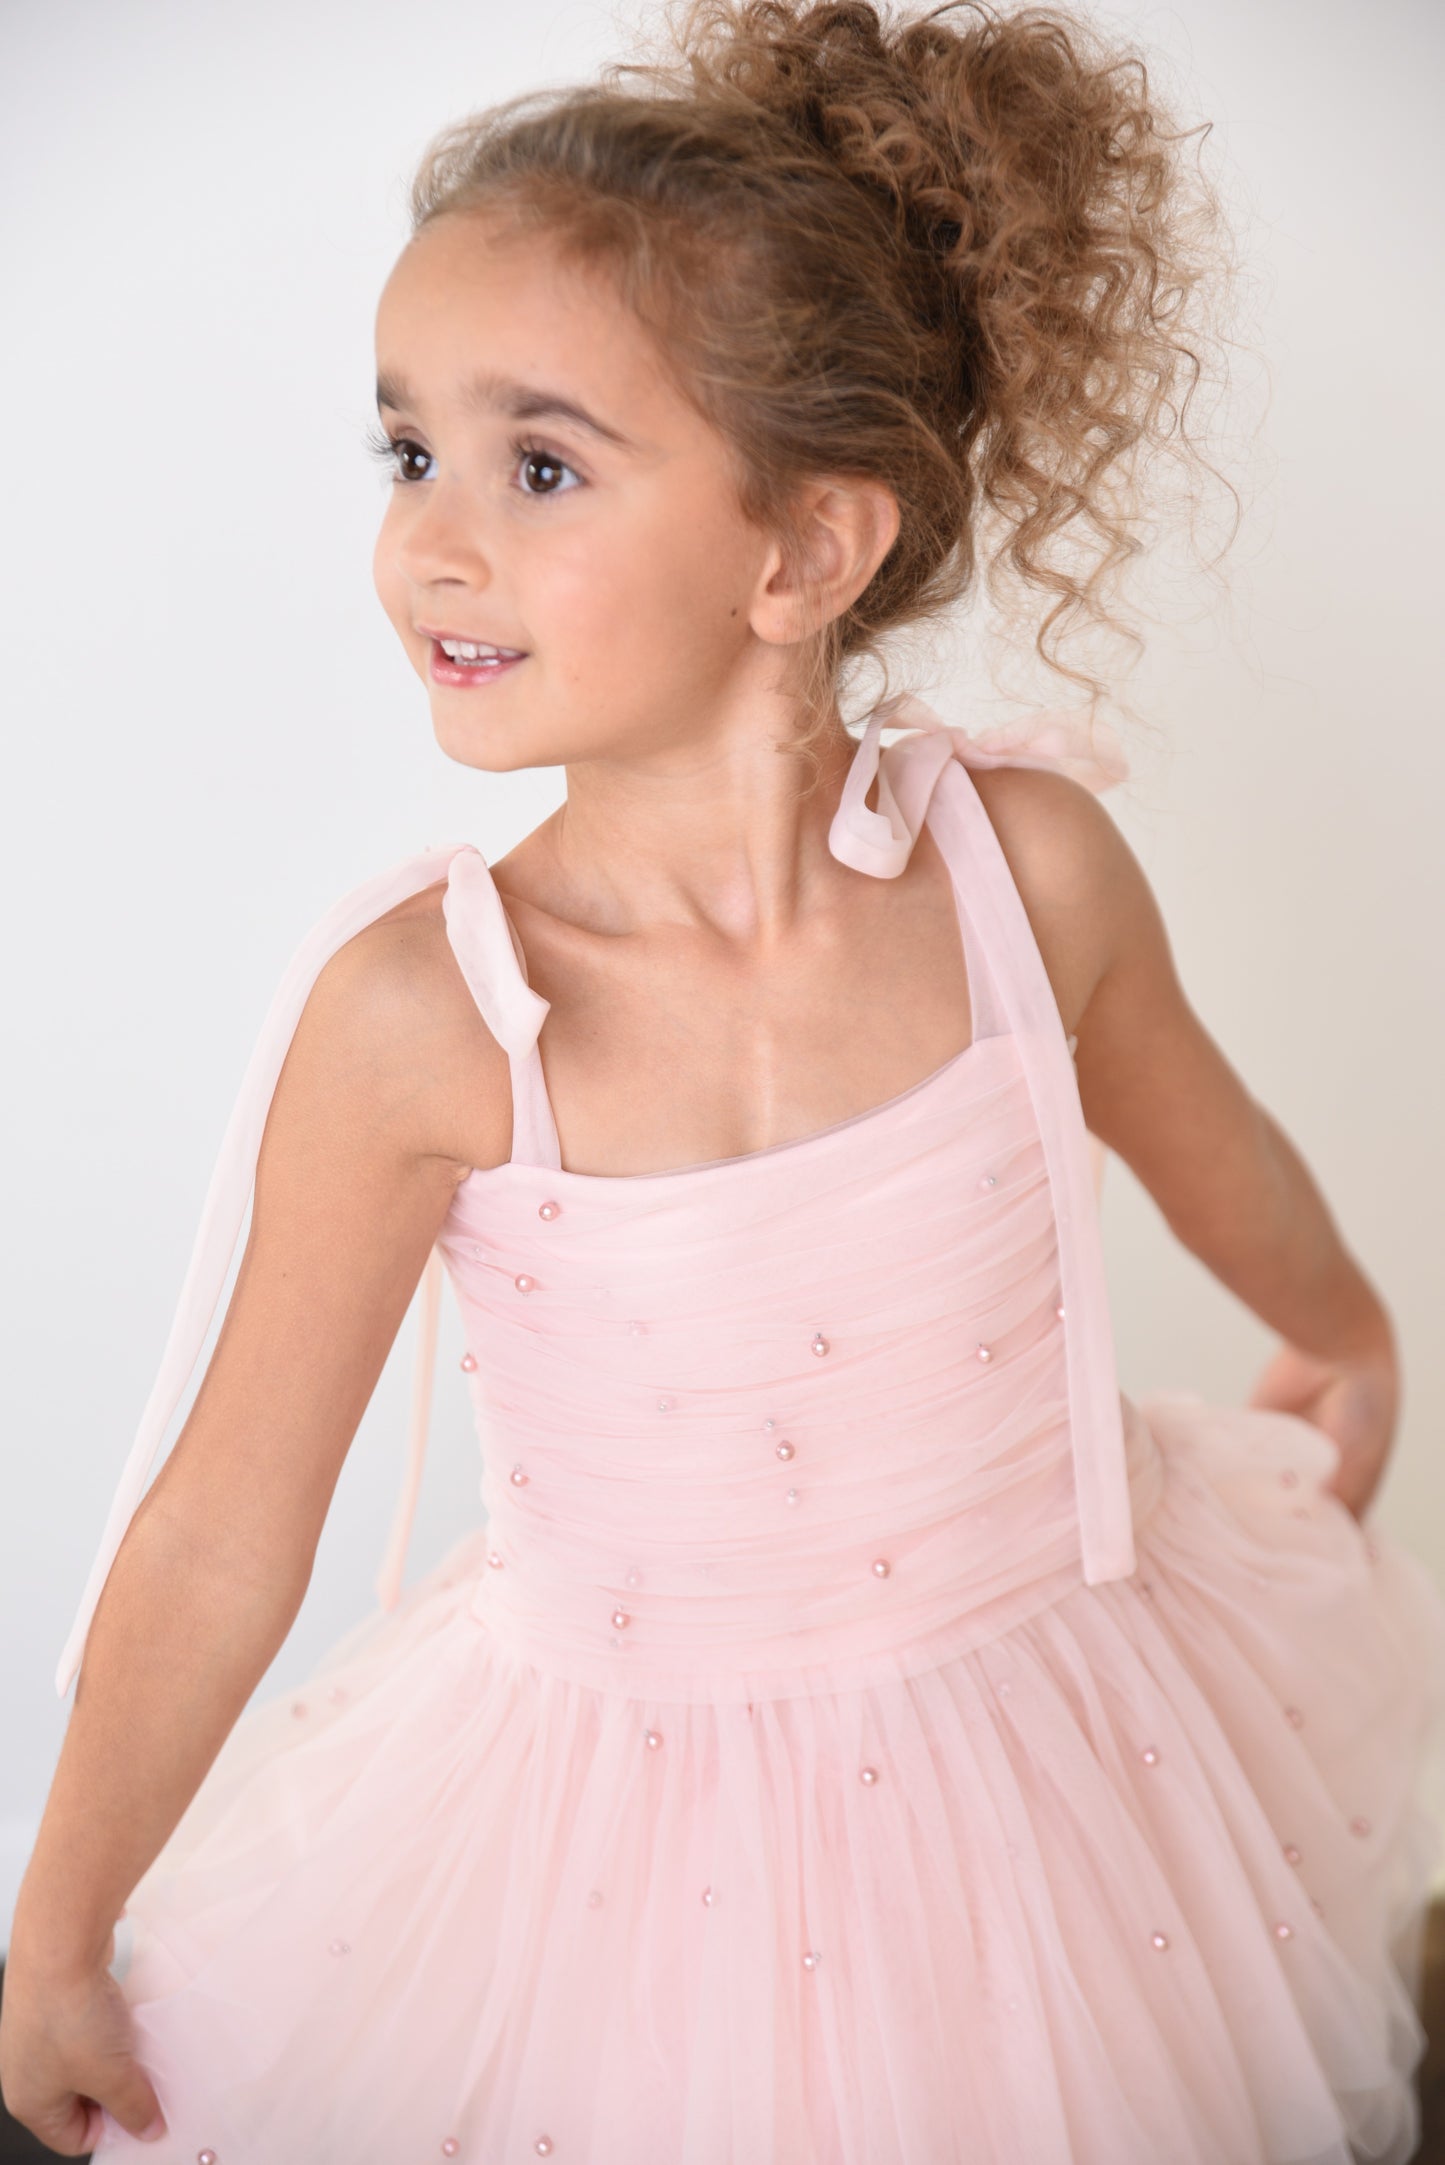 DOLLY® PEARL TULLE BALLERINA DRESS dollypink  ⚪